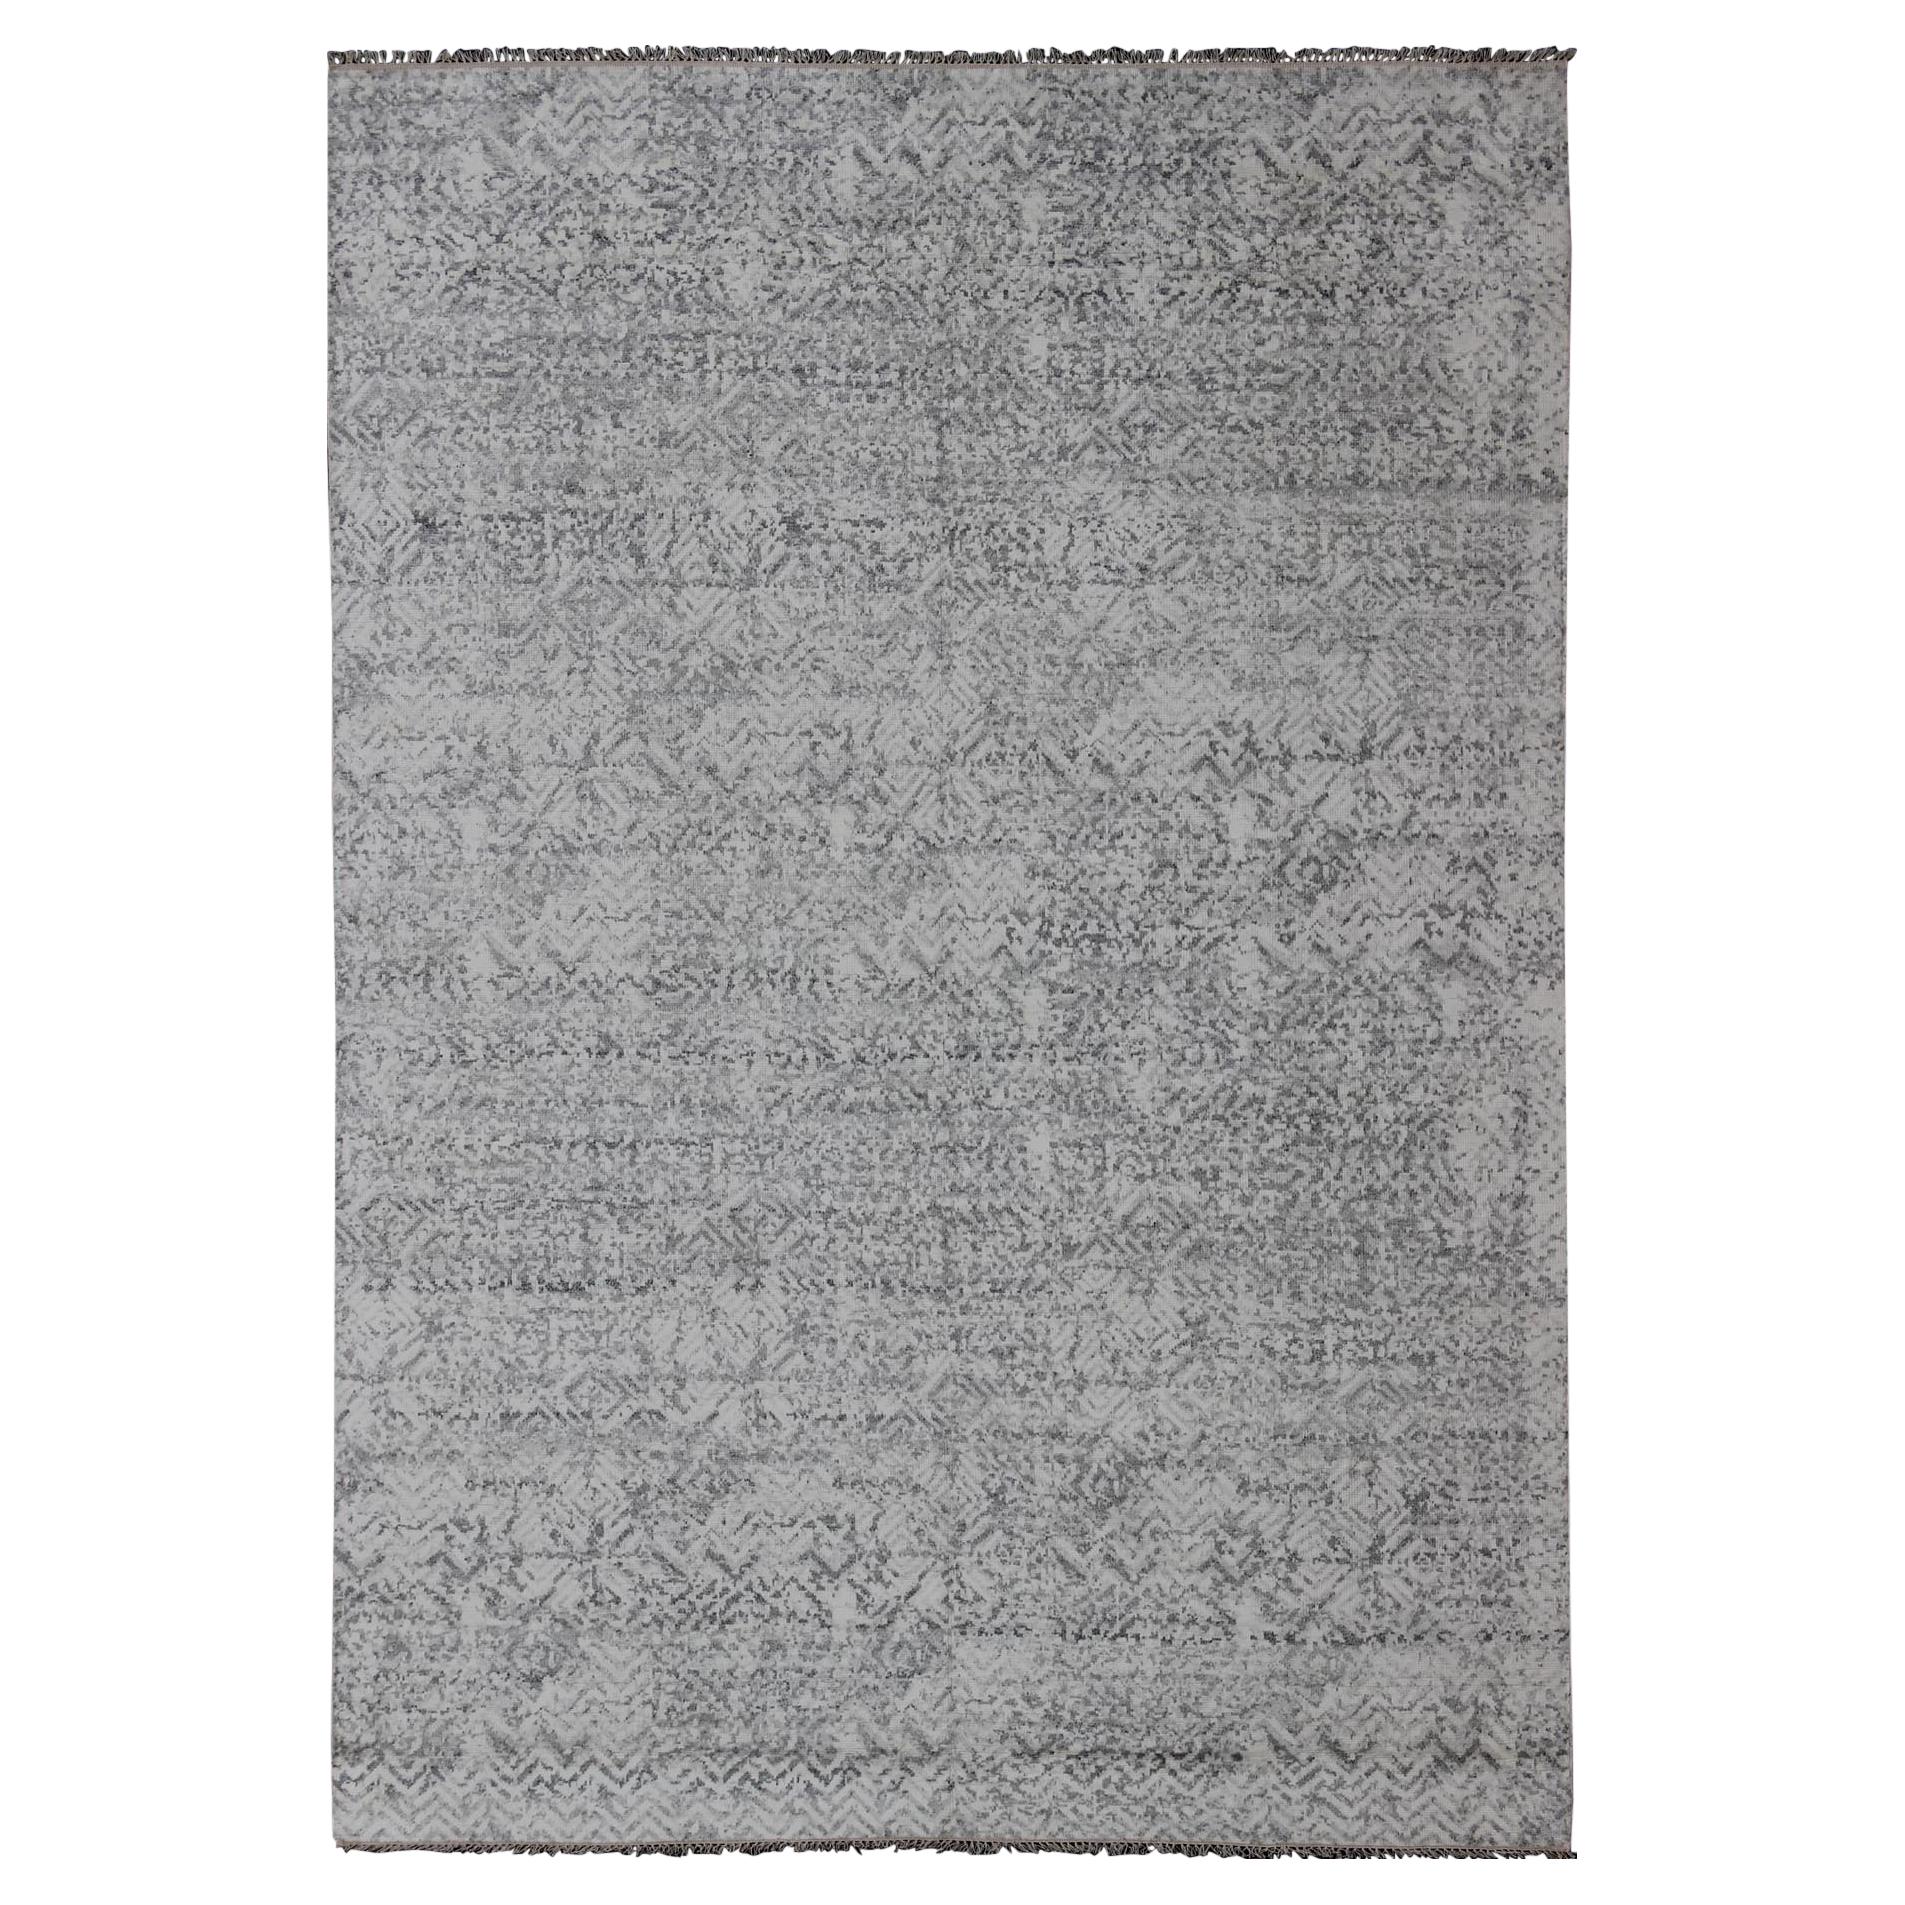 Large Modern Rug With All-Over Minimalist Pattern in Lt. Charcoal, Gray, Silver